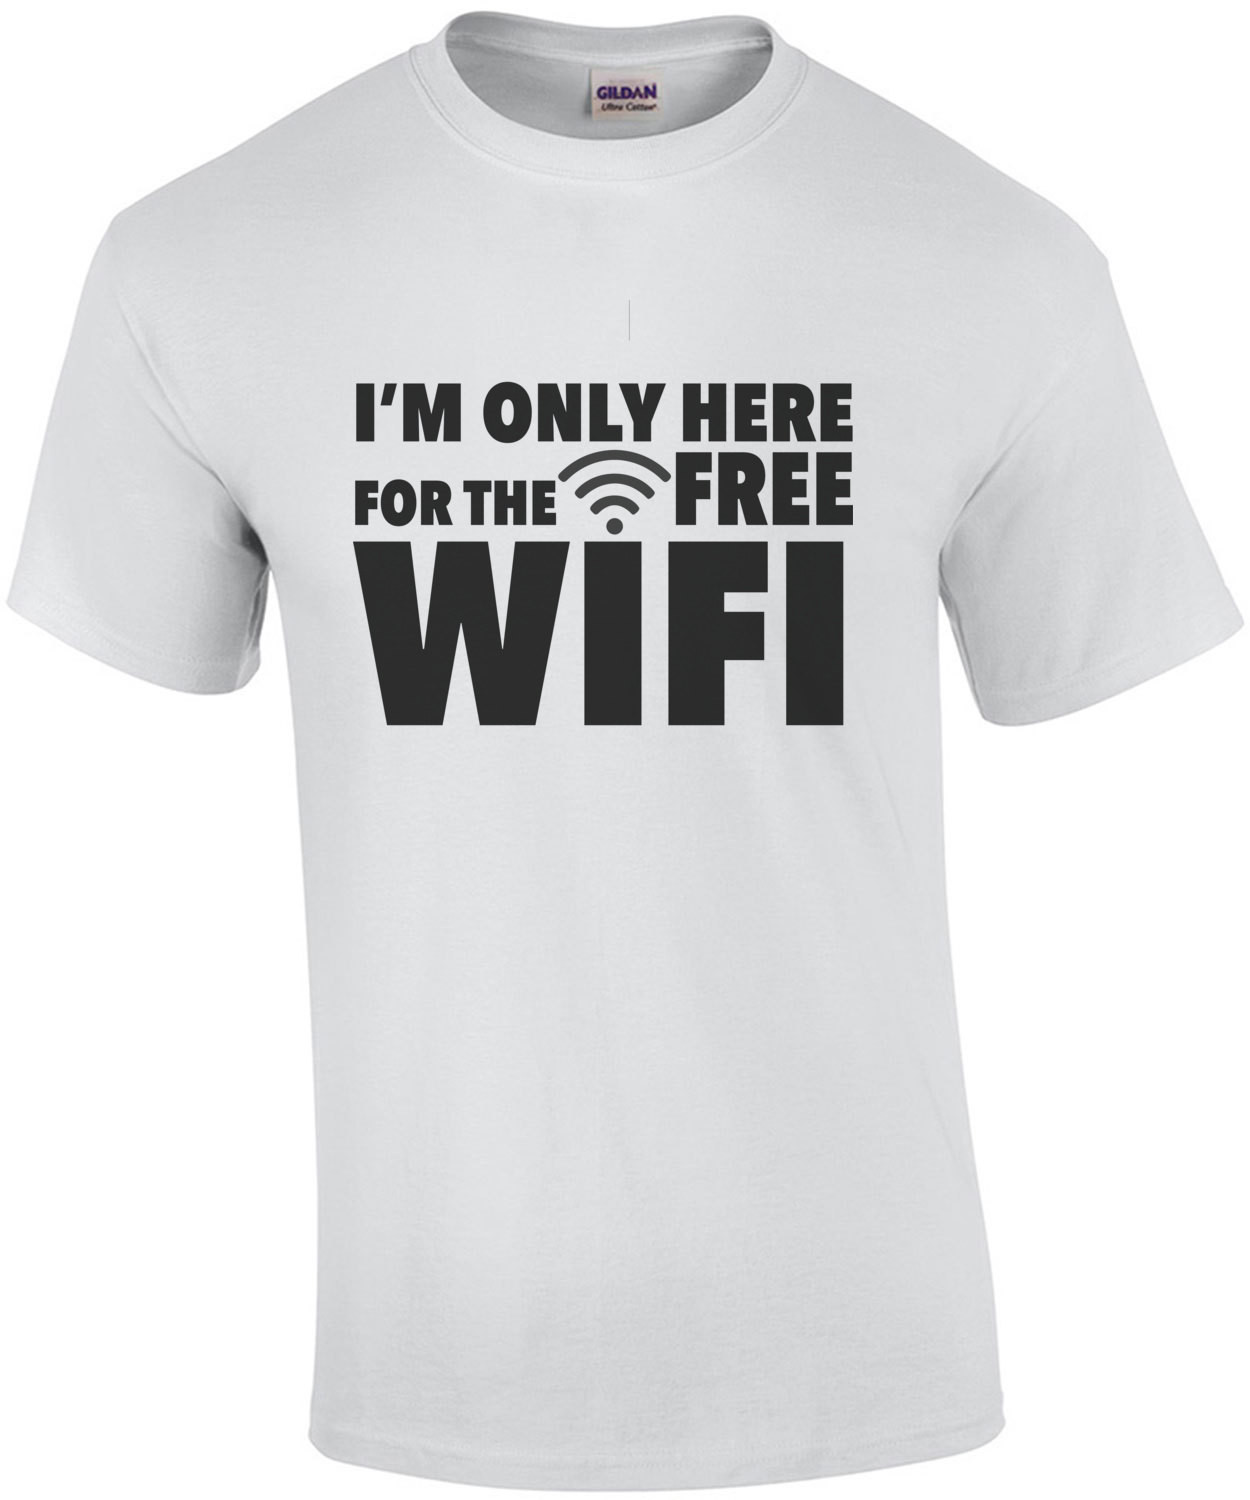 I'm only here for the free wifi - sarcastic t-shirt